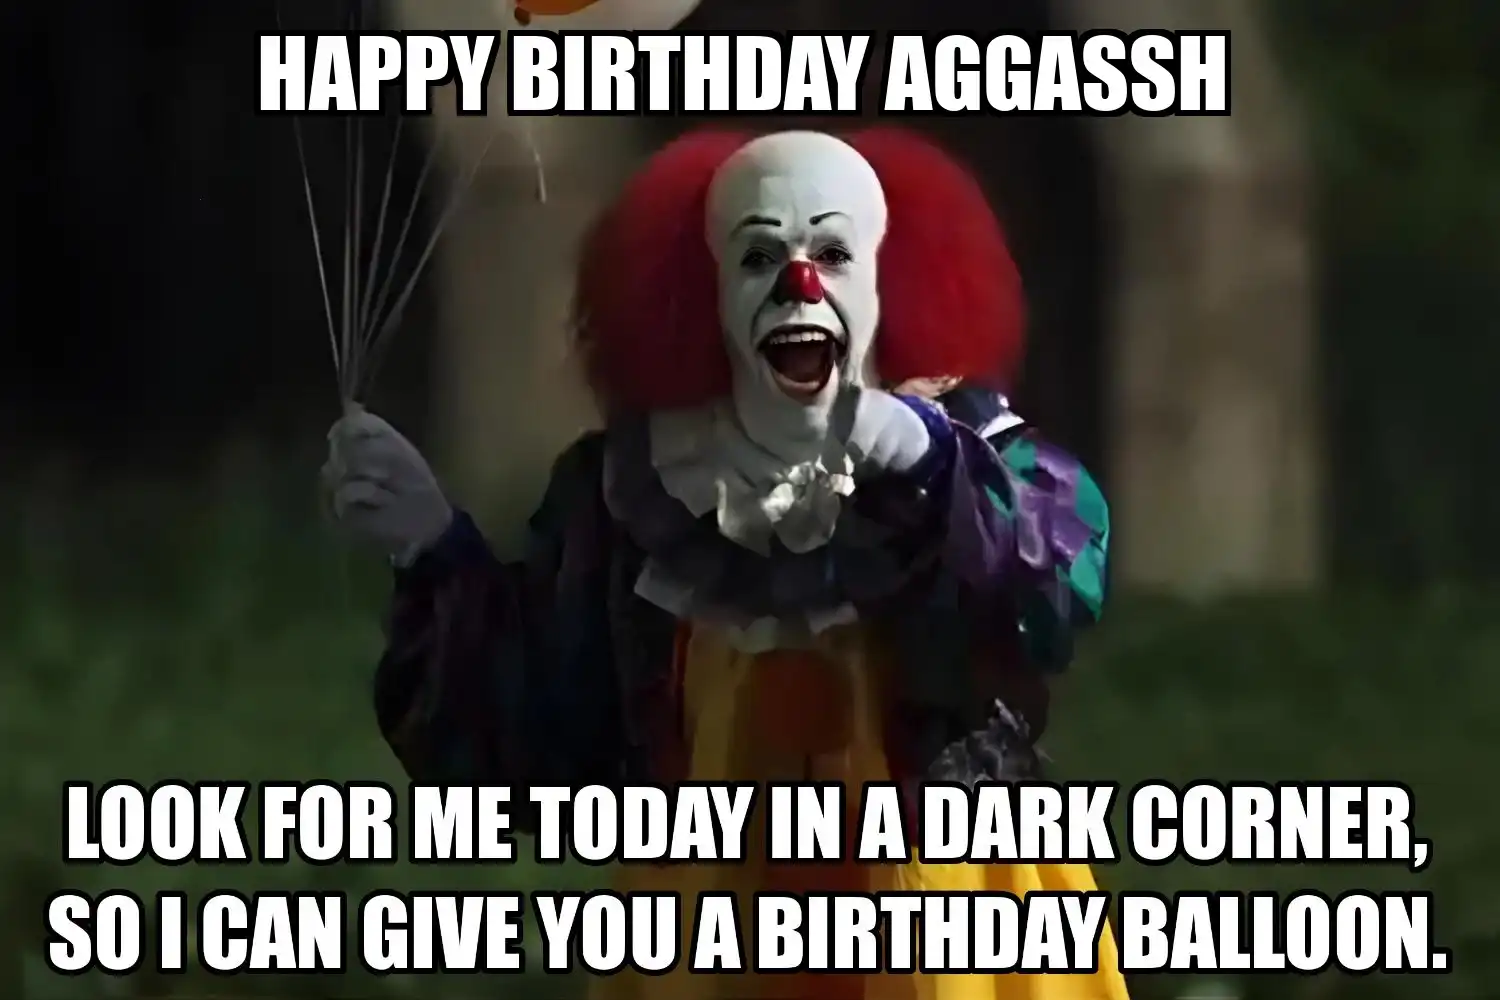 Happy Birthday Aggassh I Can Give You A Balloon Meme